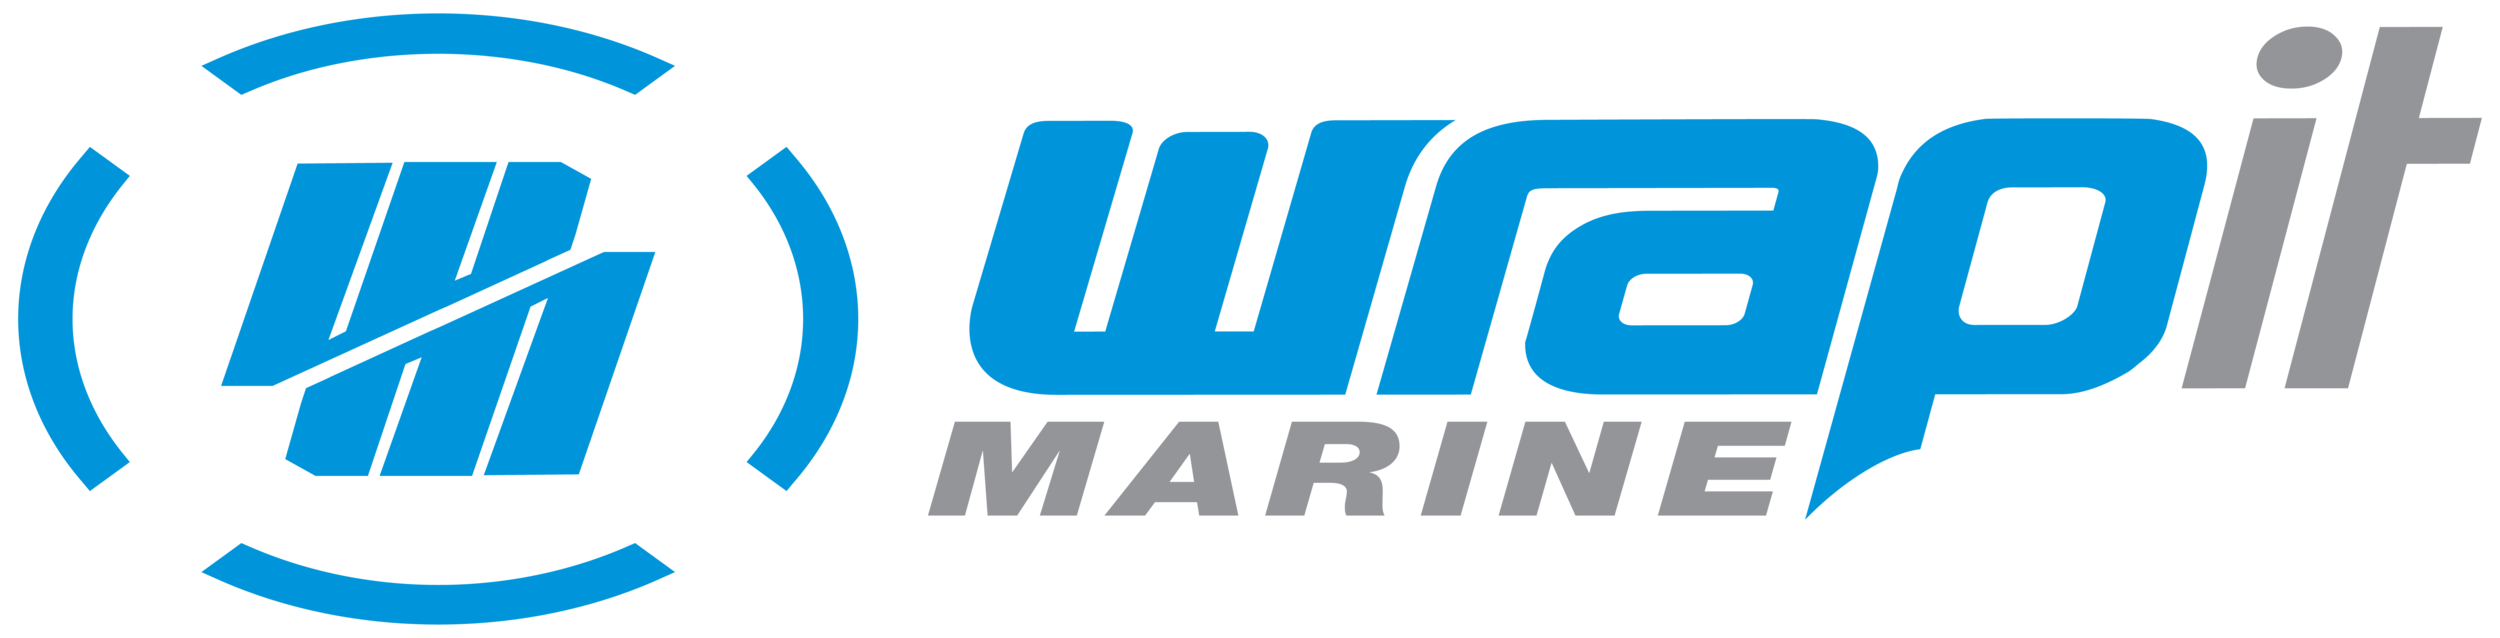 Wrapit Marine.png